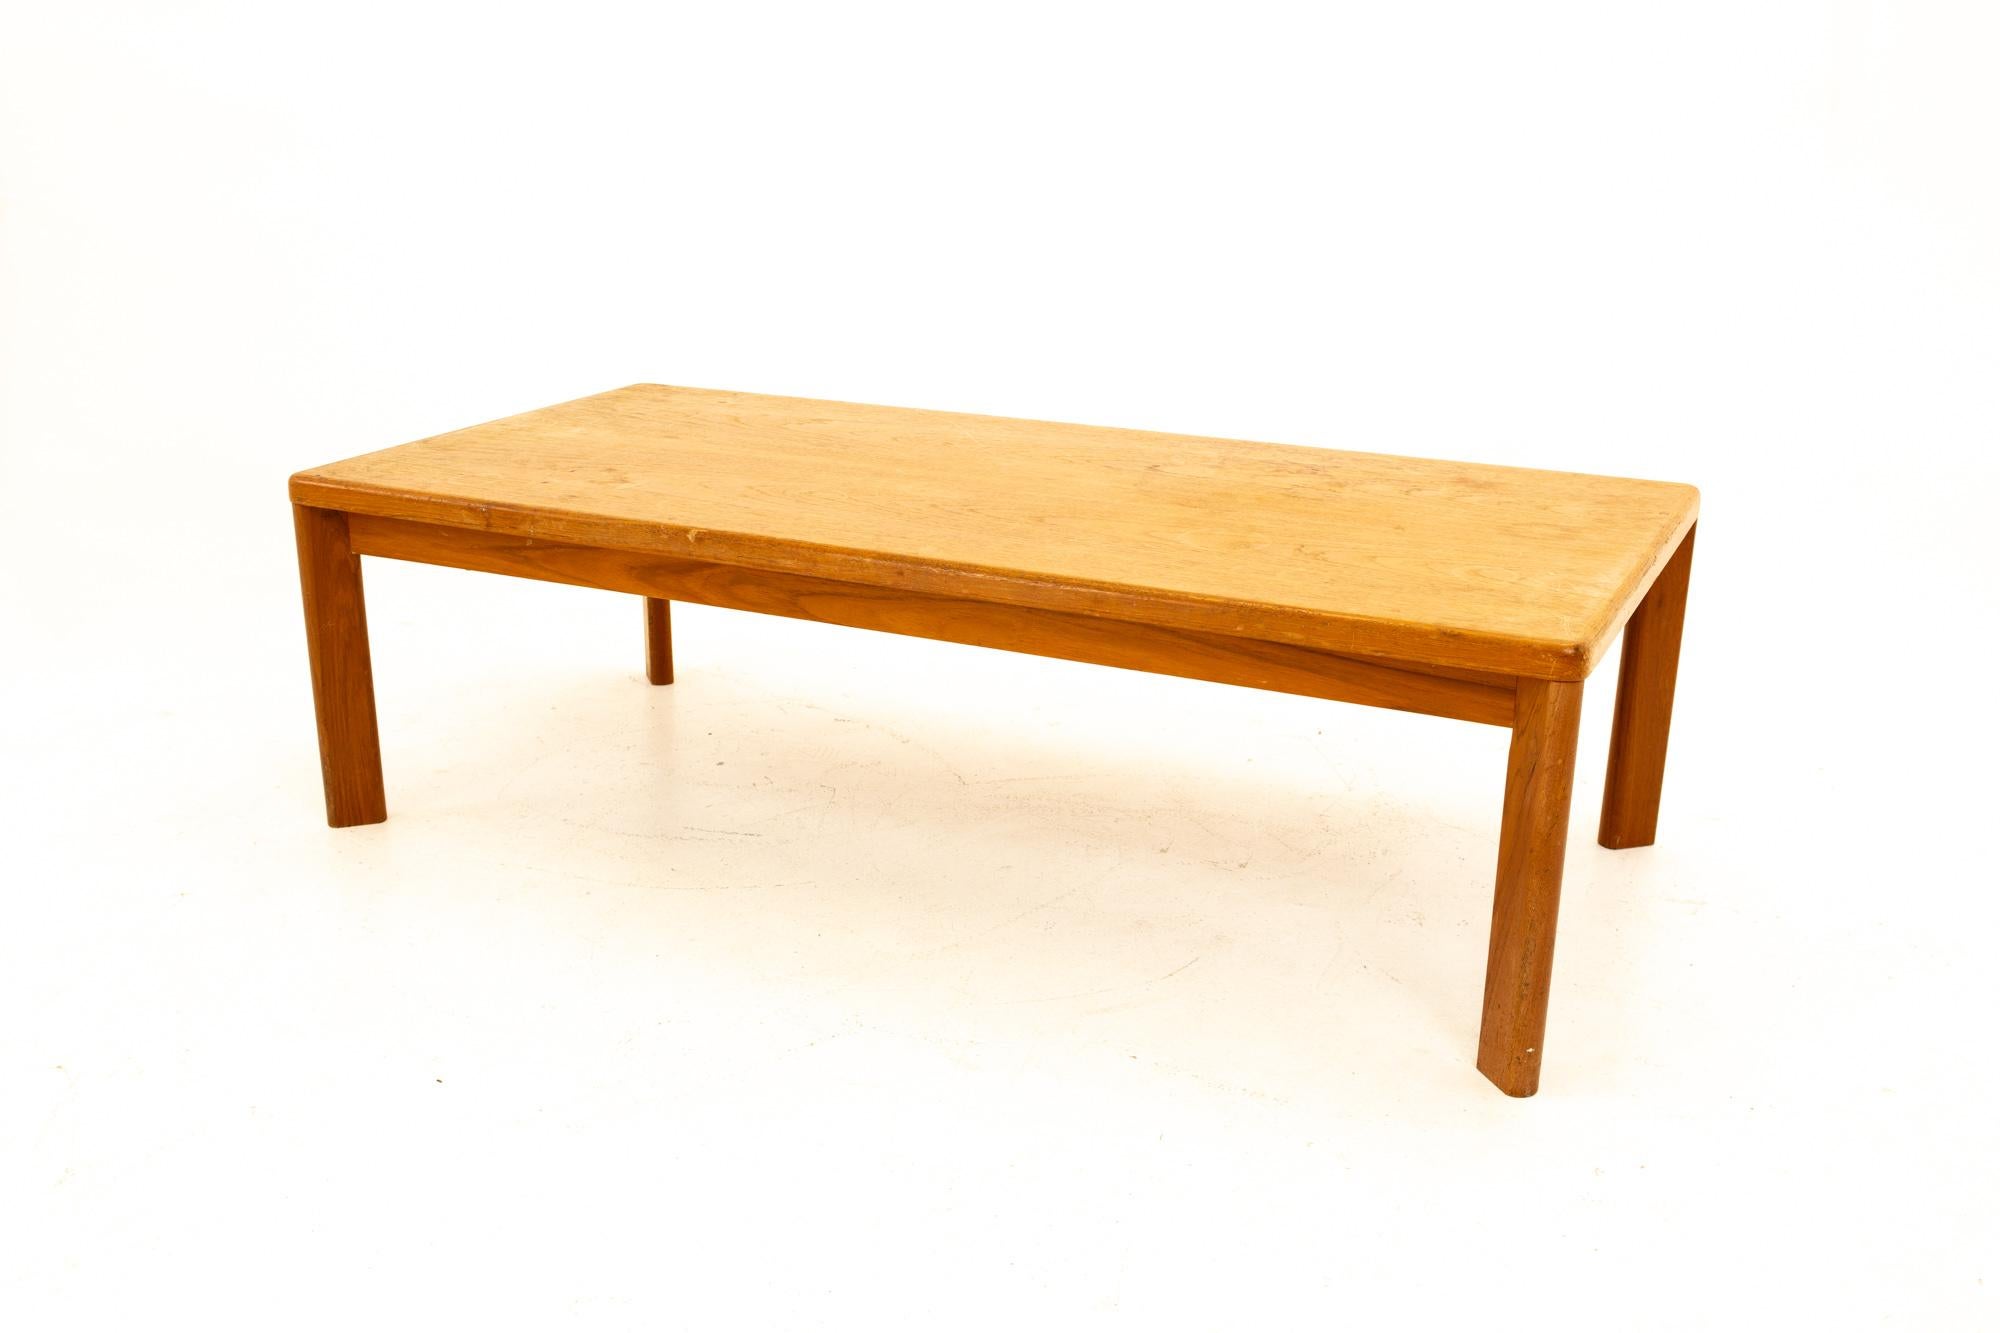 Mid century Danish teak coffee table
Table measures: 53.25 wide x 25.75 deep x 15.75

All pieces of furniture can be had in what we call restored vintage condition. That means the piece is restored upon purchase so it’s free of watermarks, chips